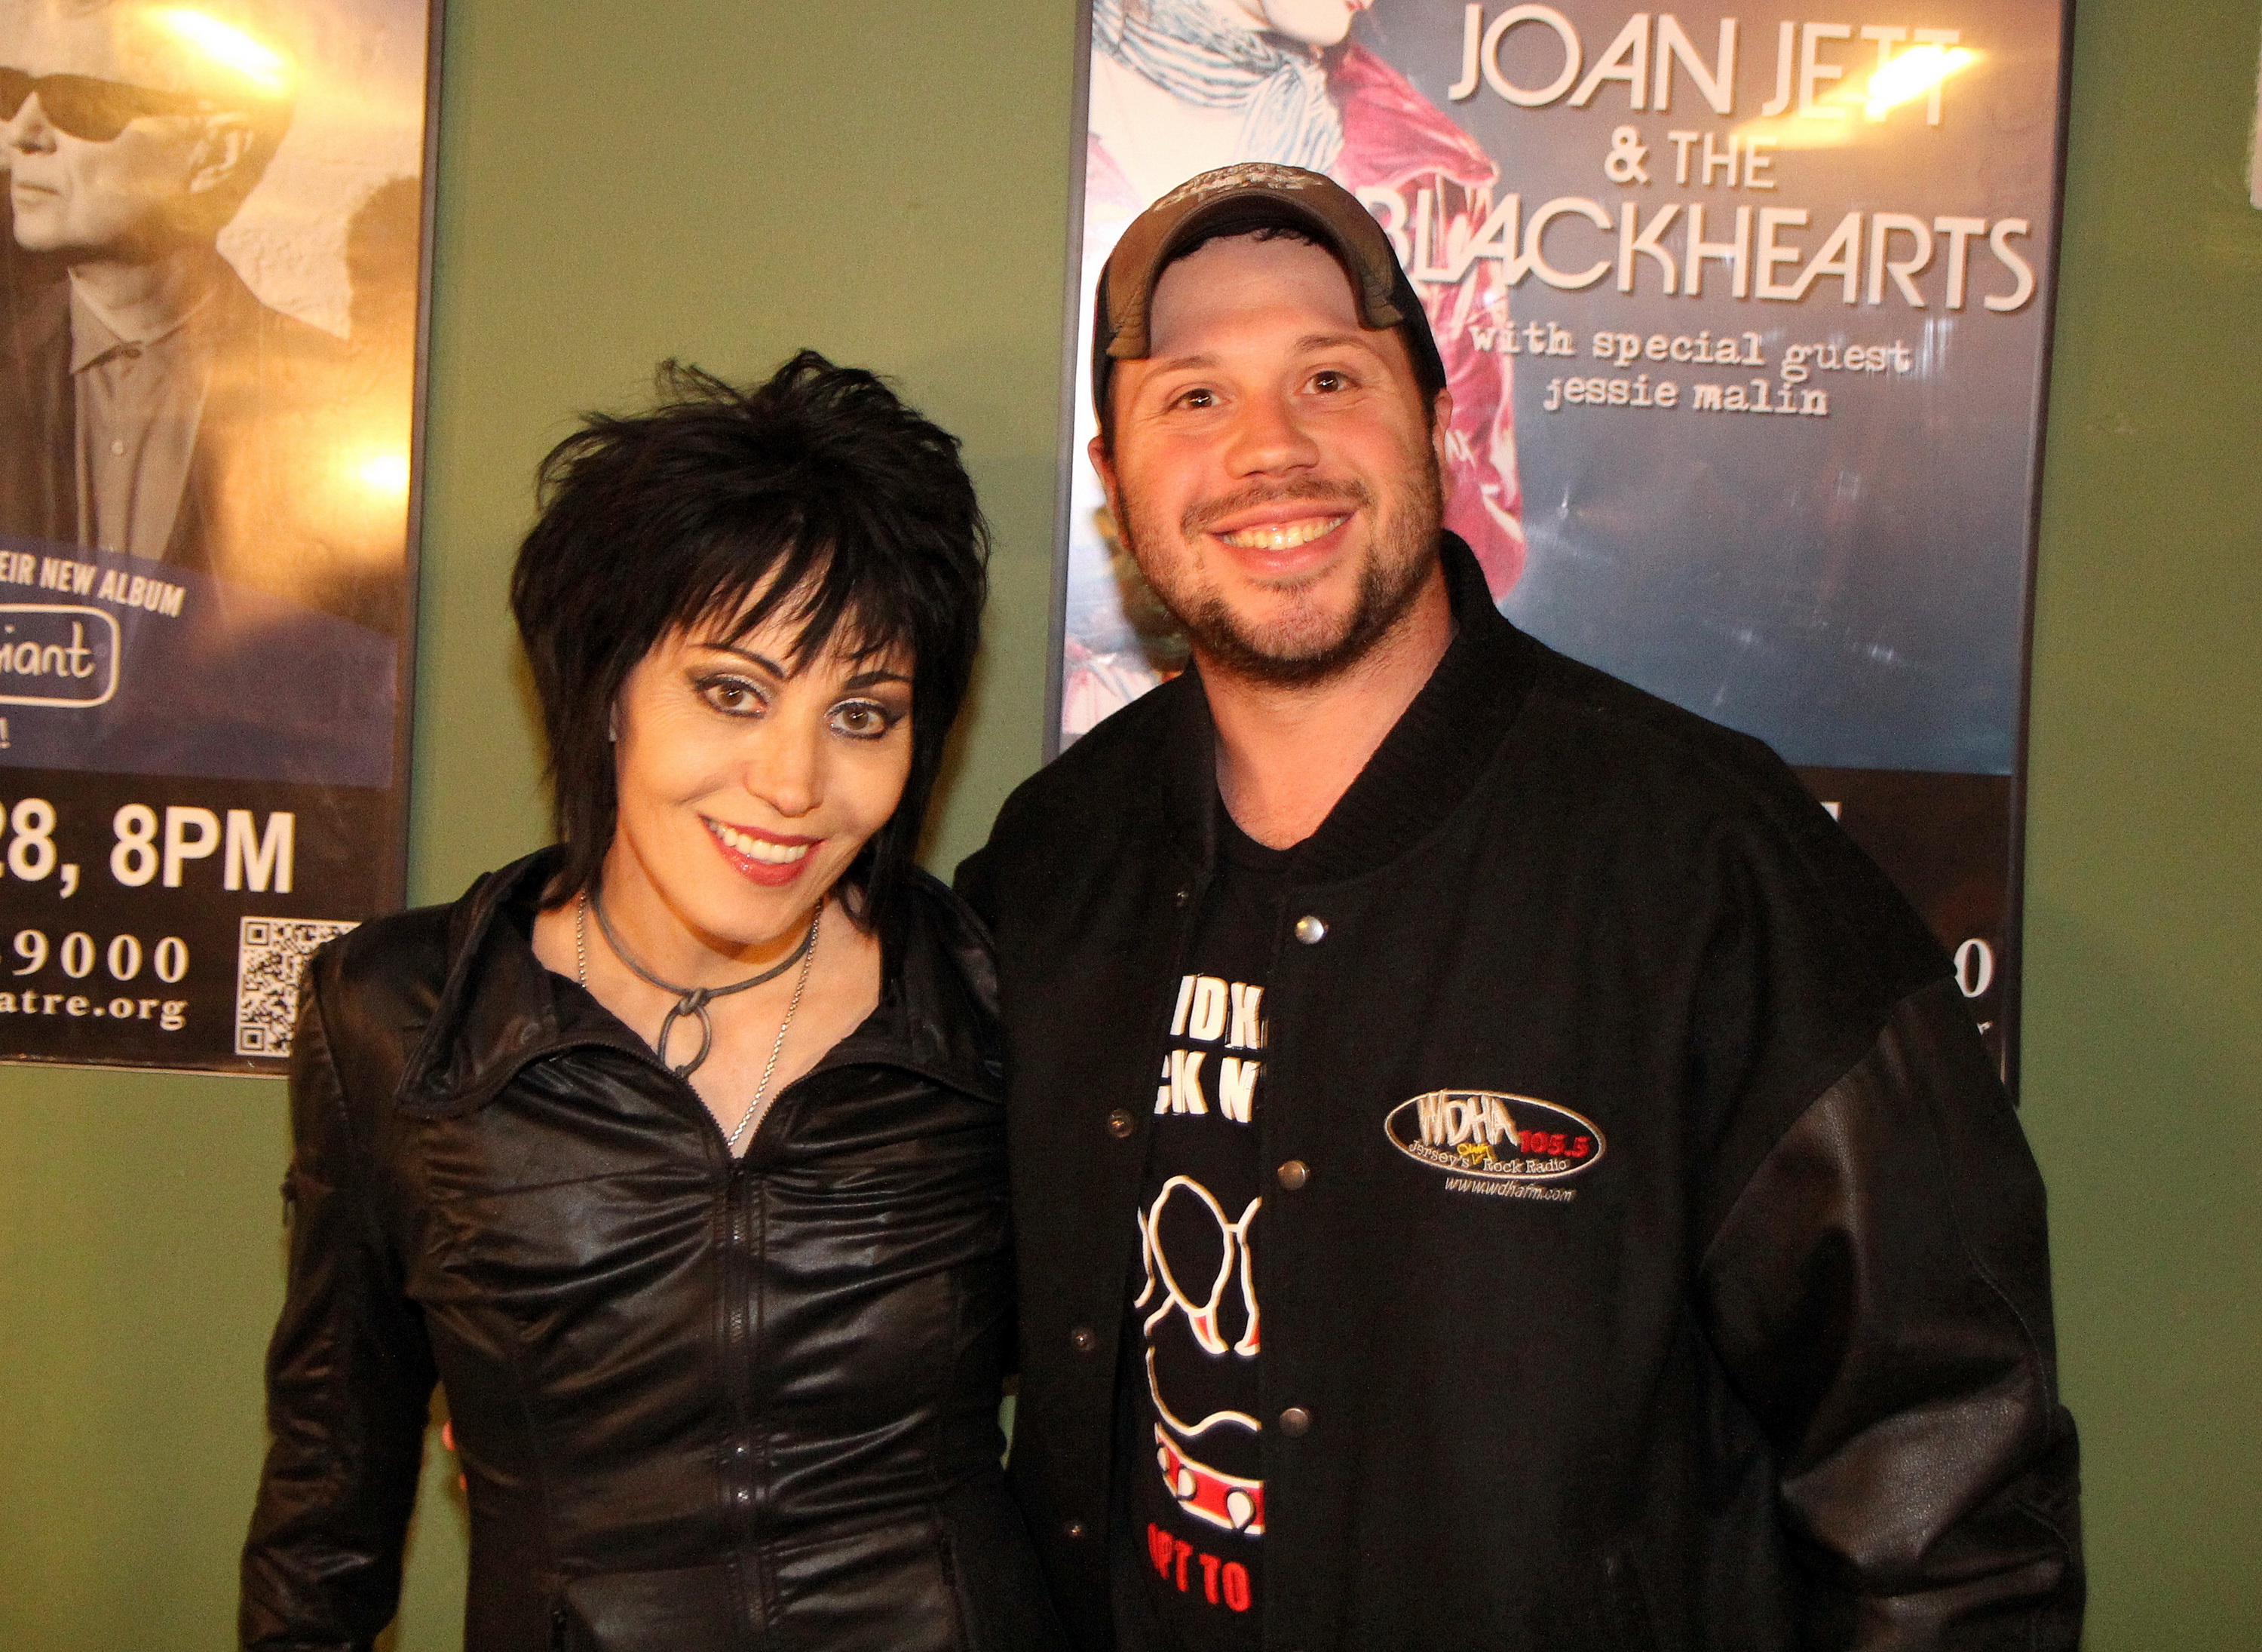 JOAN JETT COUNT BASIE MEET and GREET PHOTOS Rich Russo The King of